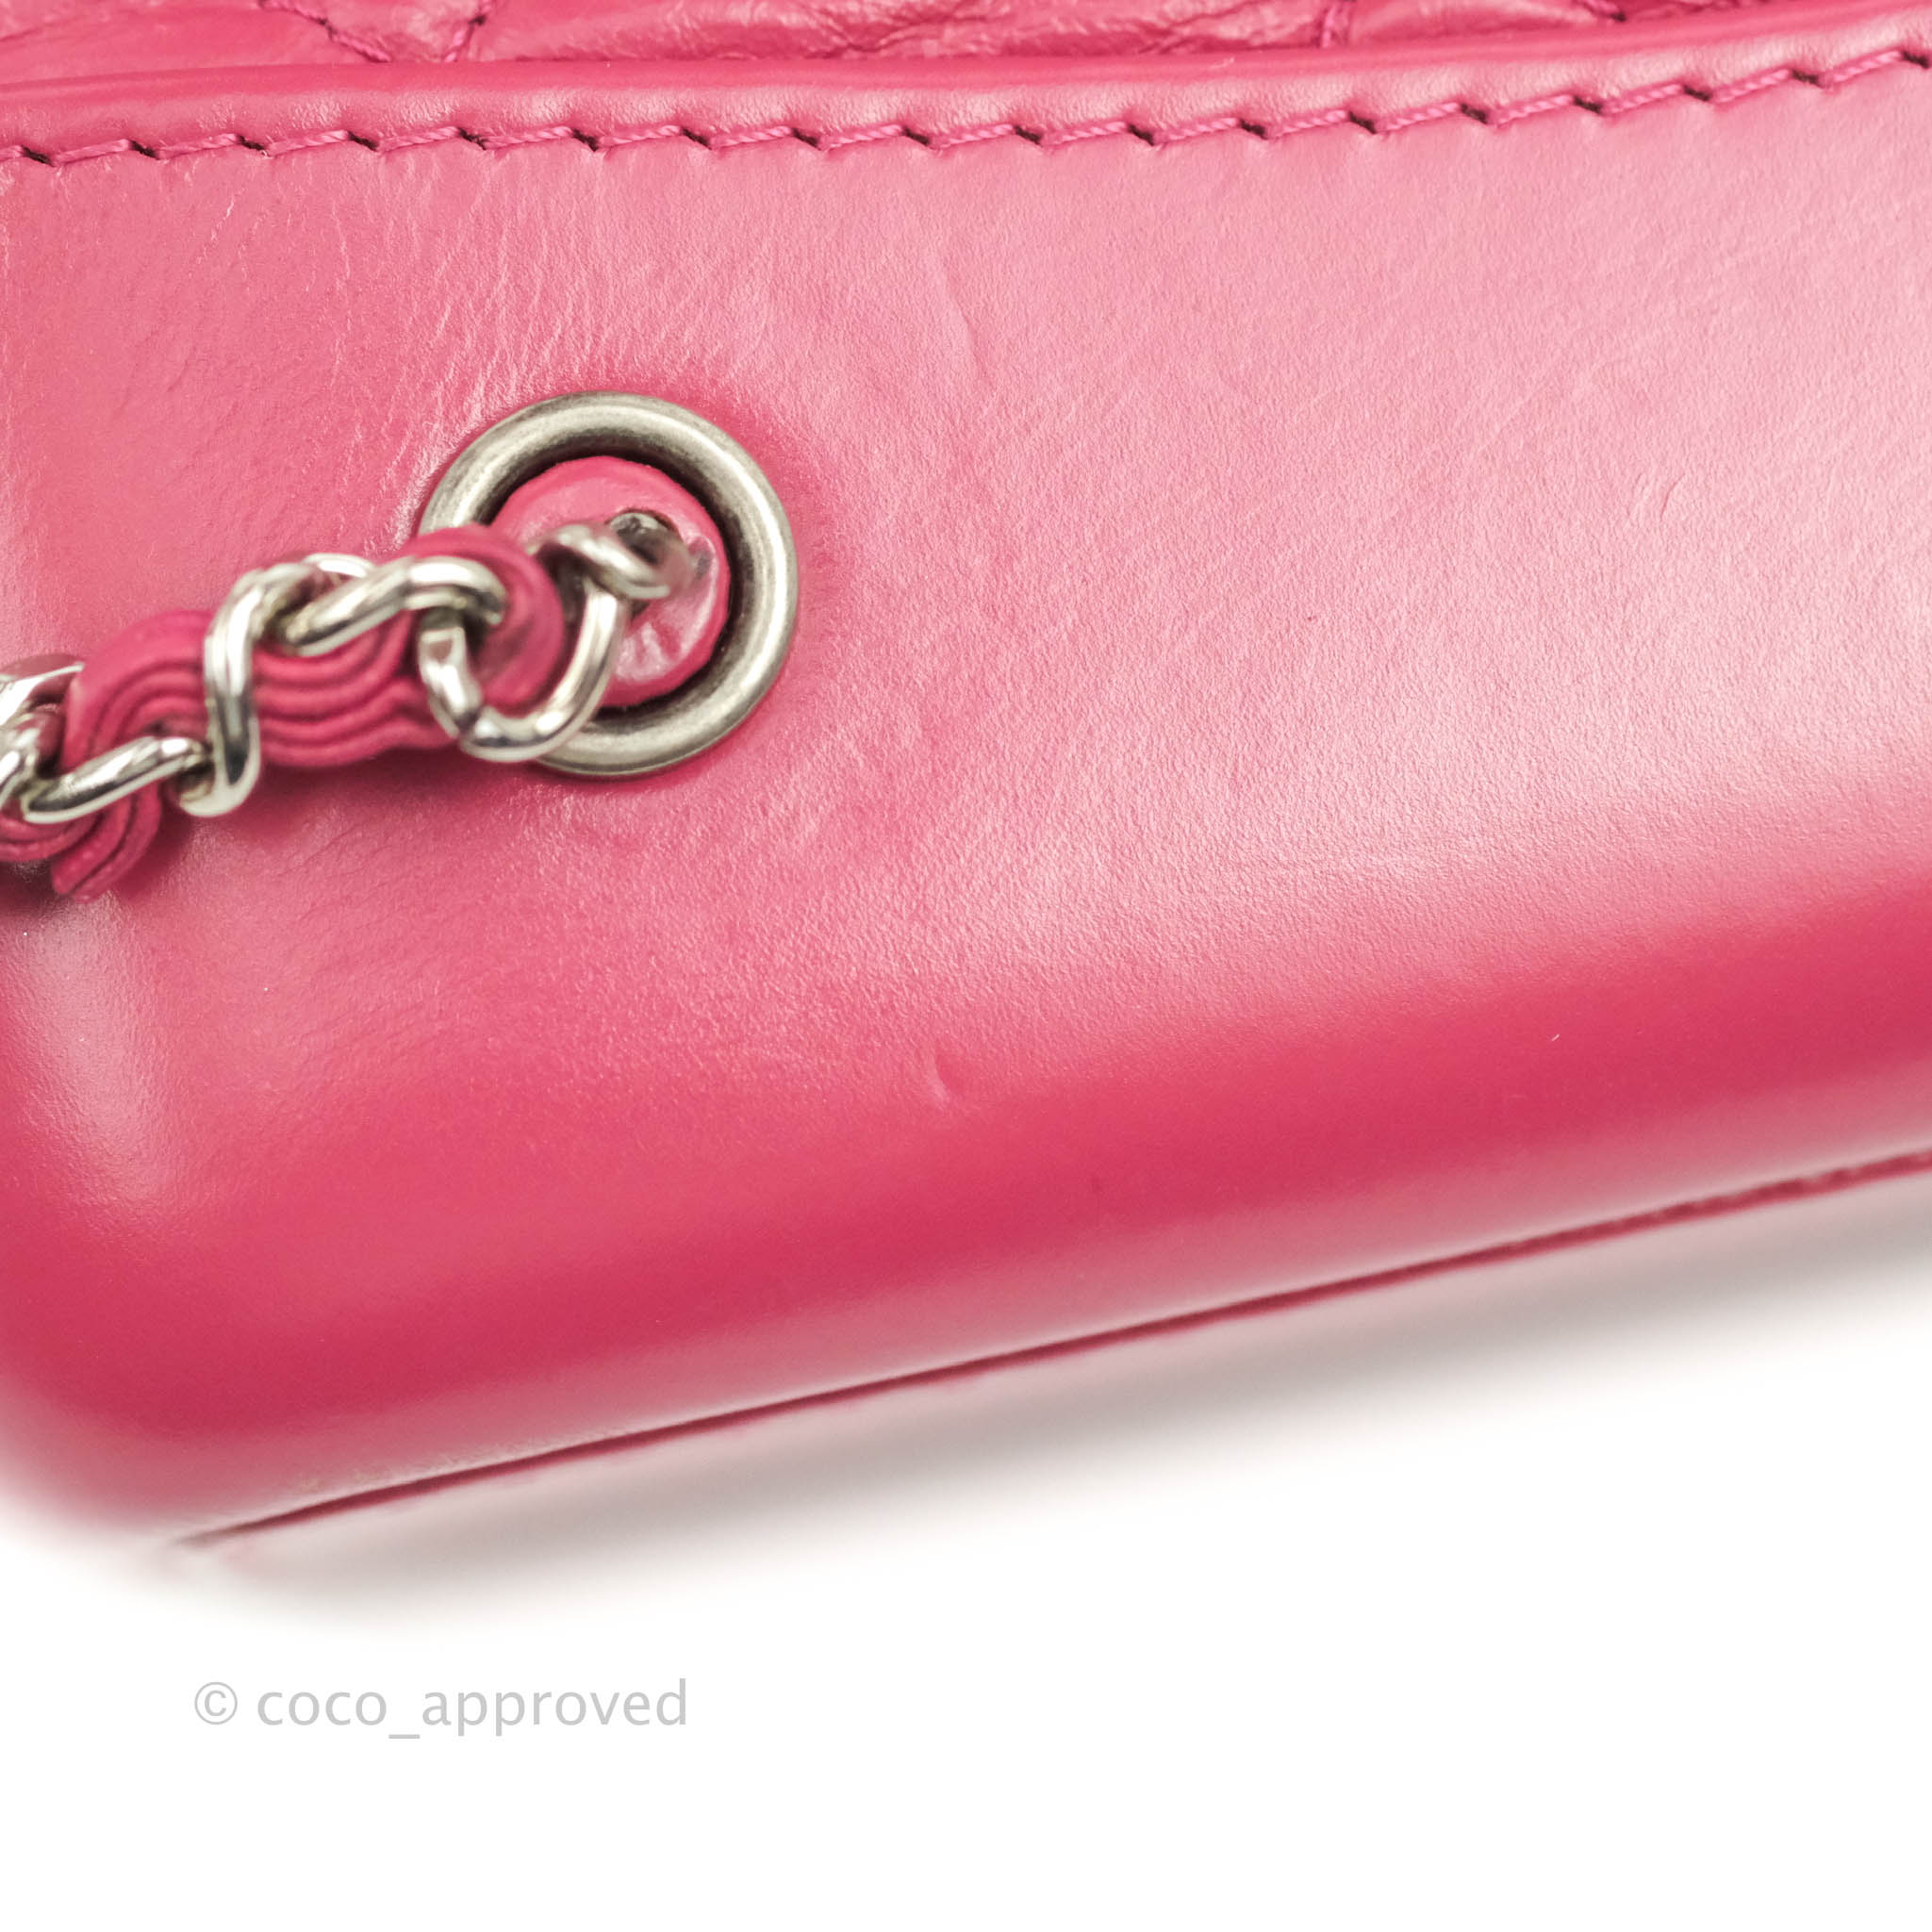 Gabrielle leather backpack Chanel Pink in Leather - 31060422